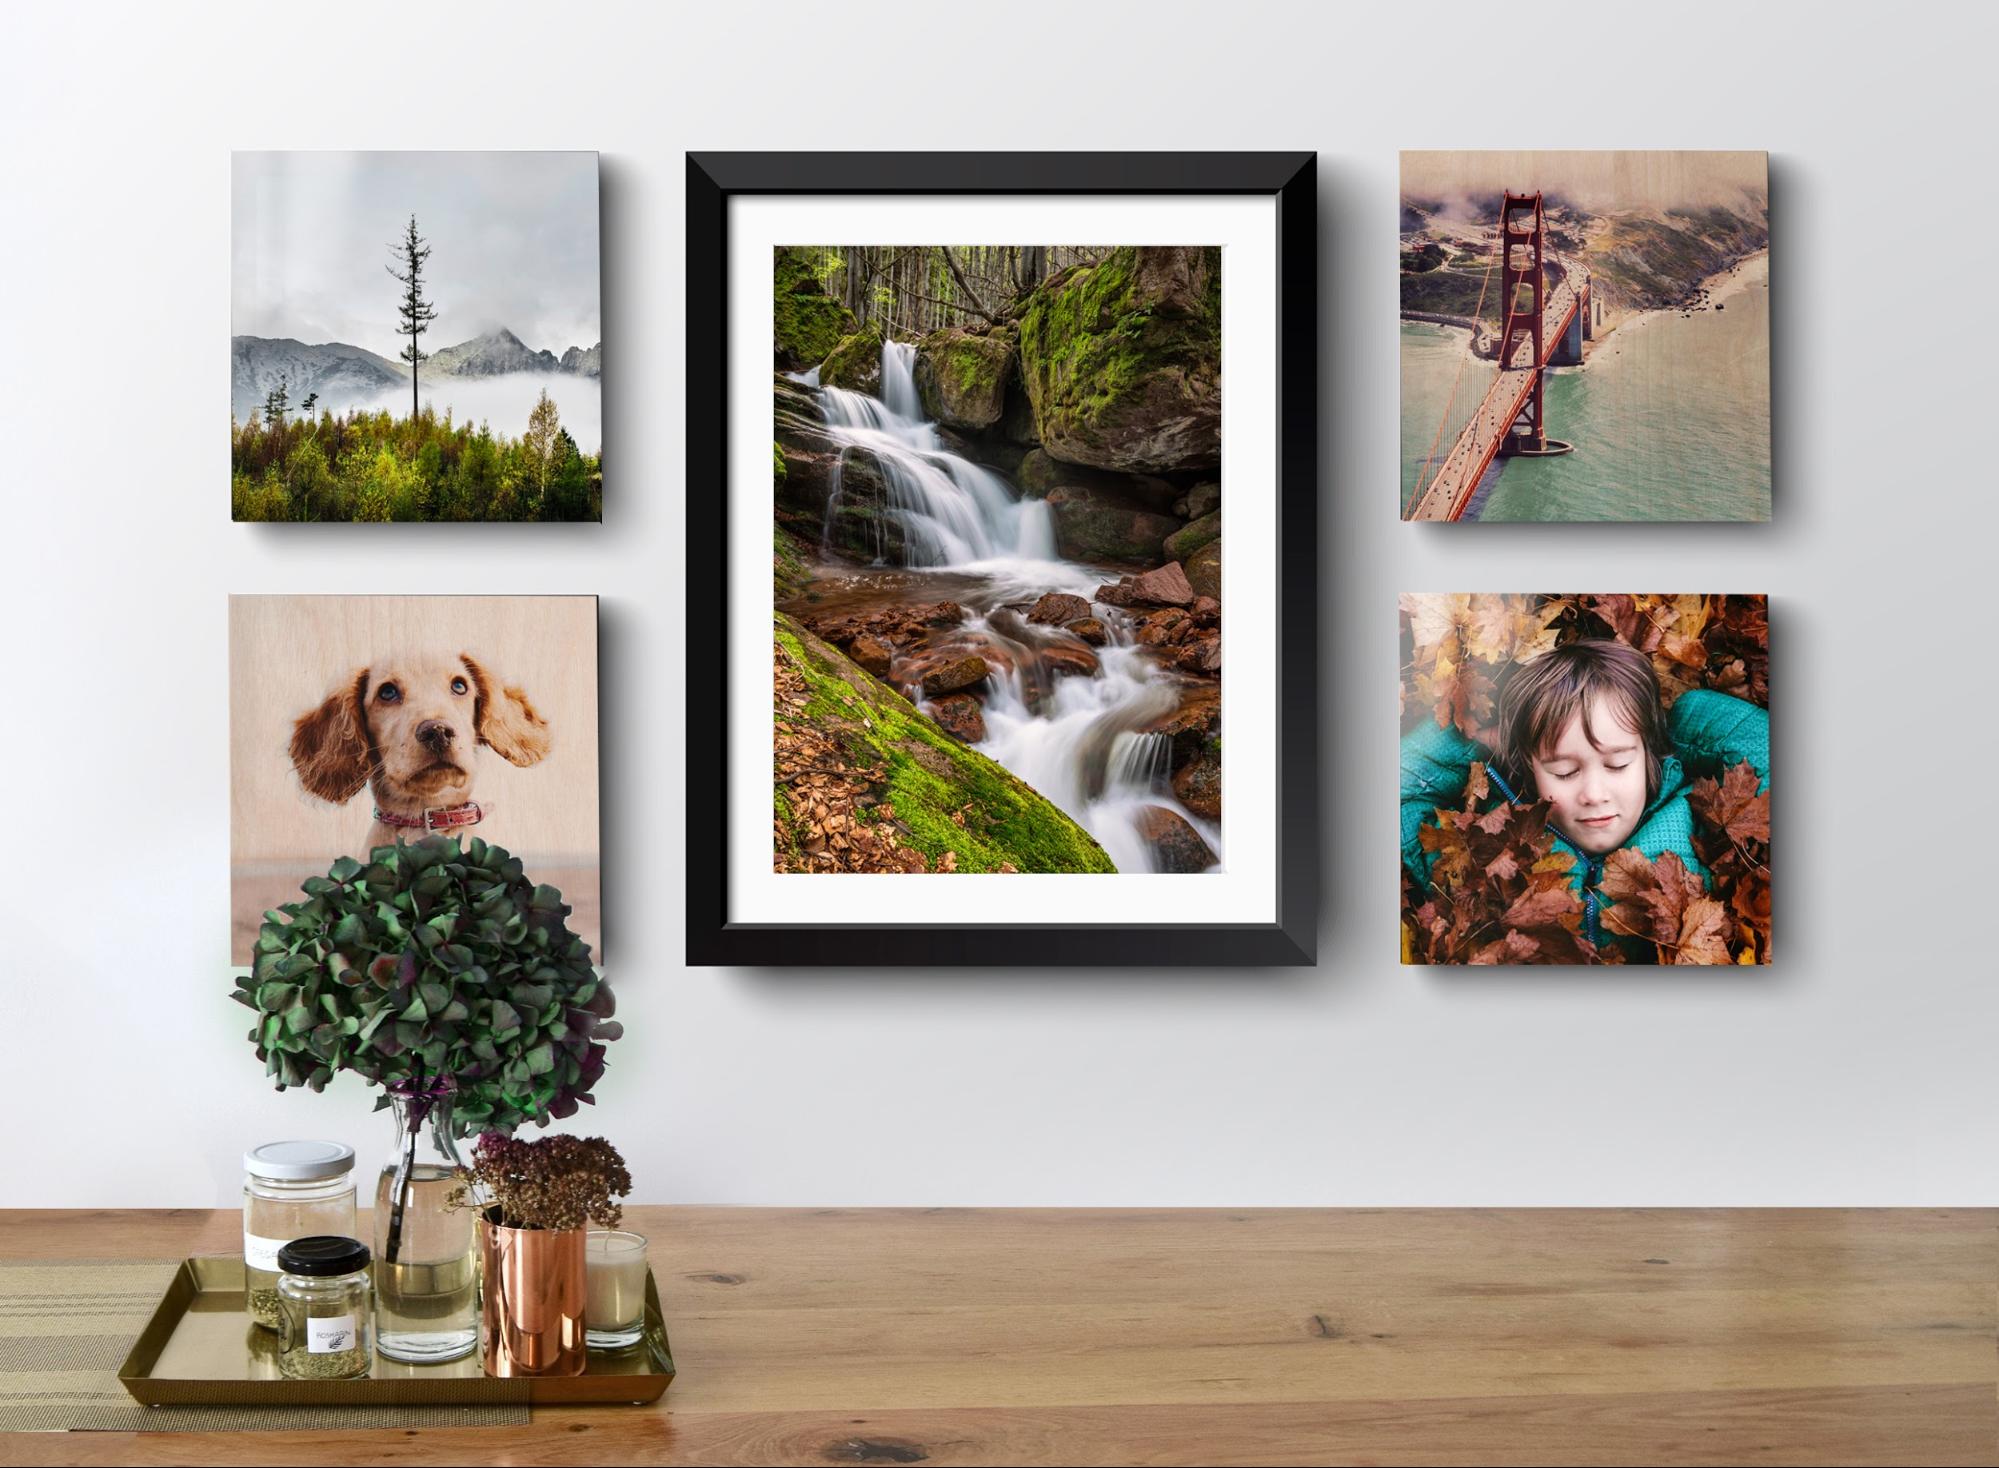 5 gifts you didn’t know you could custom-print, and how Printique makes it easy